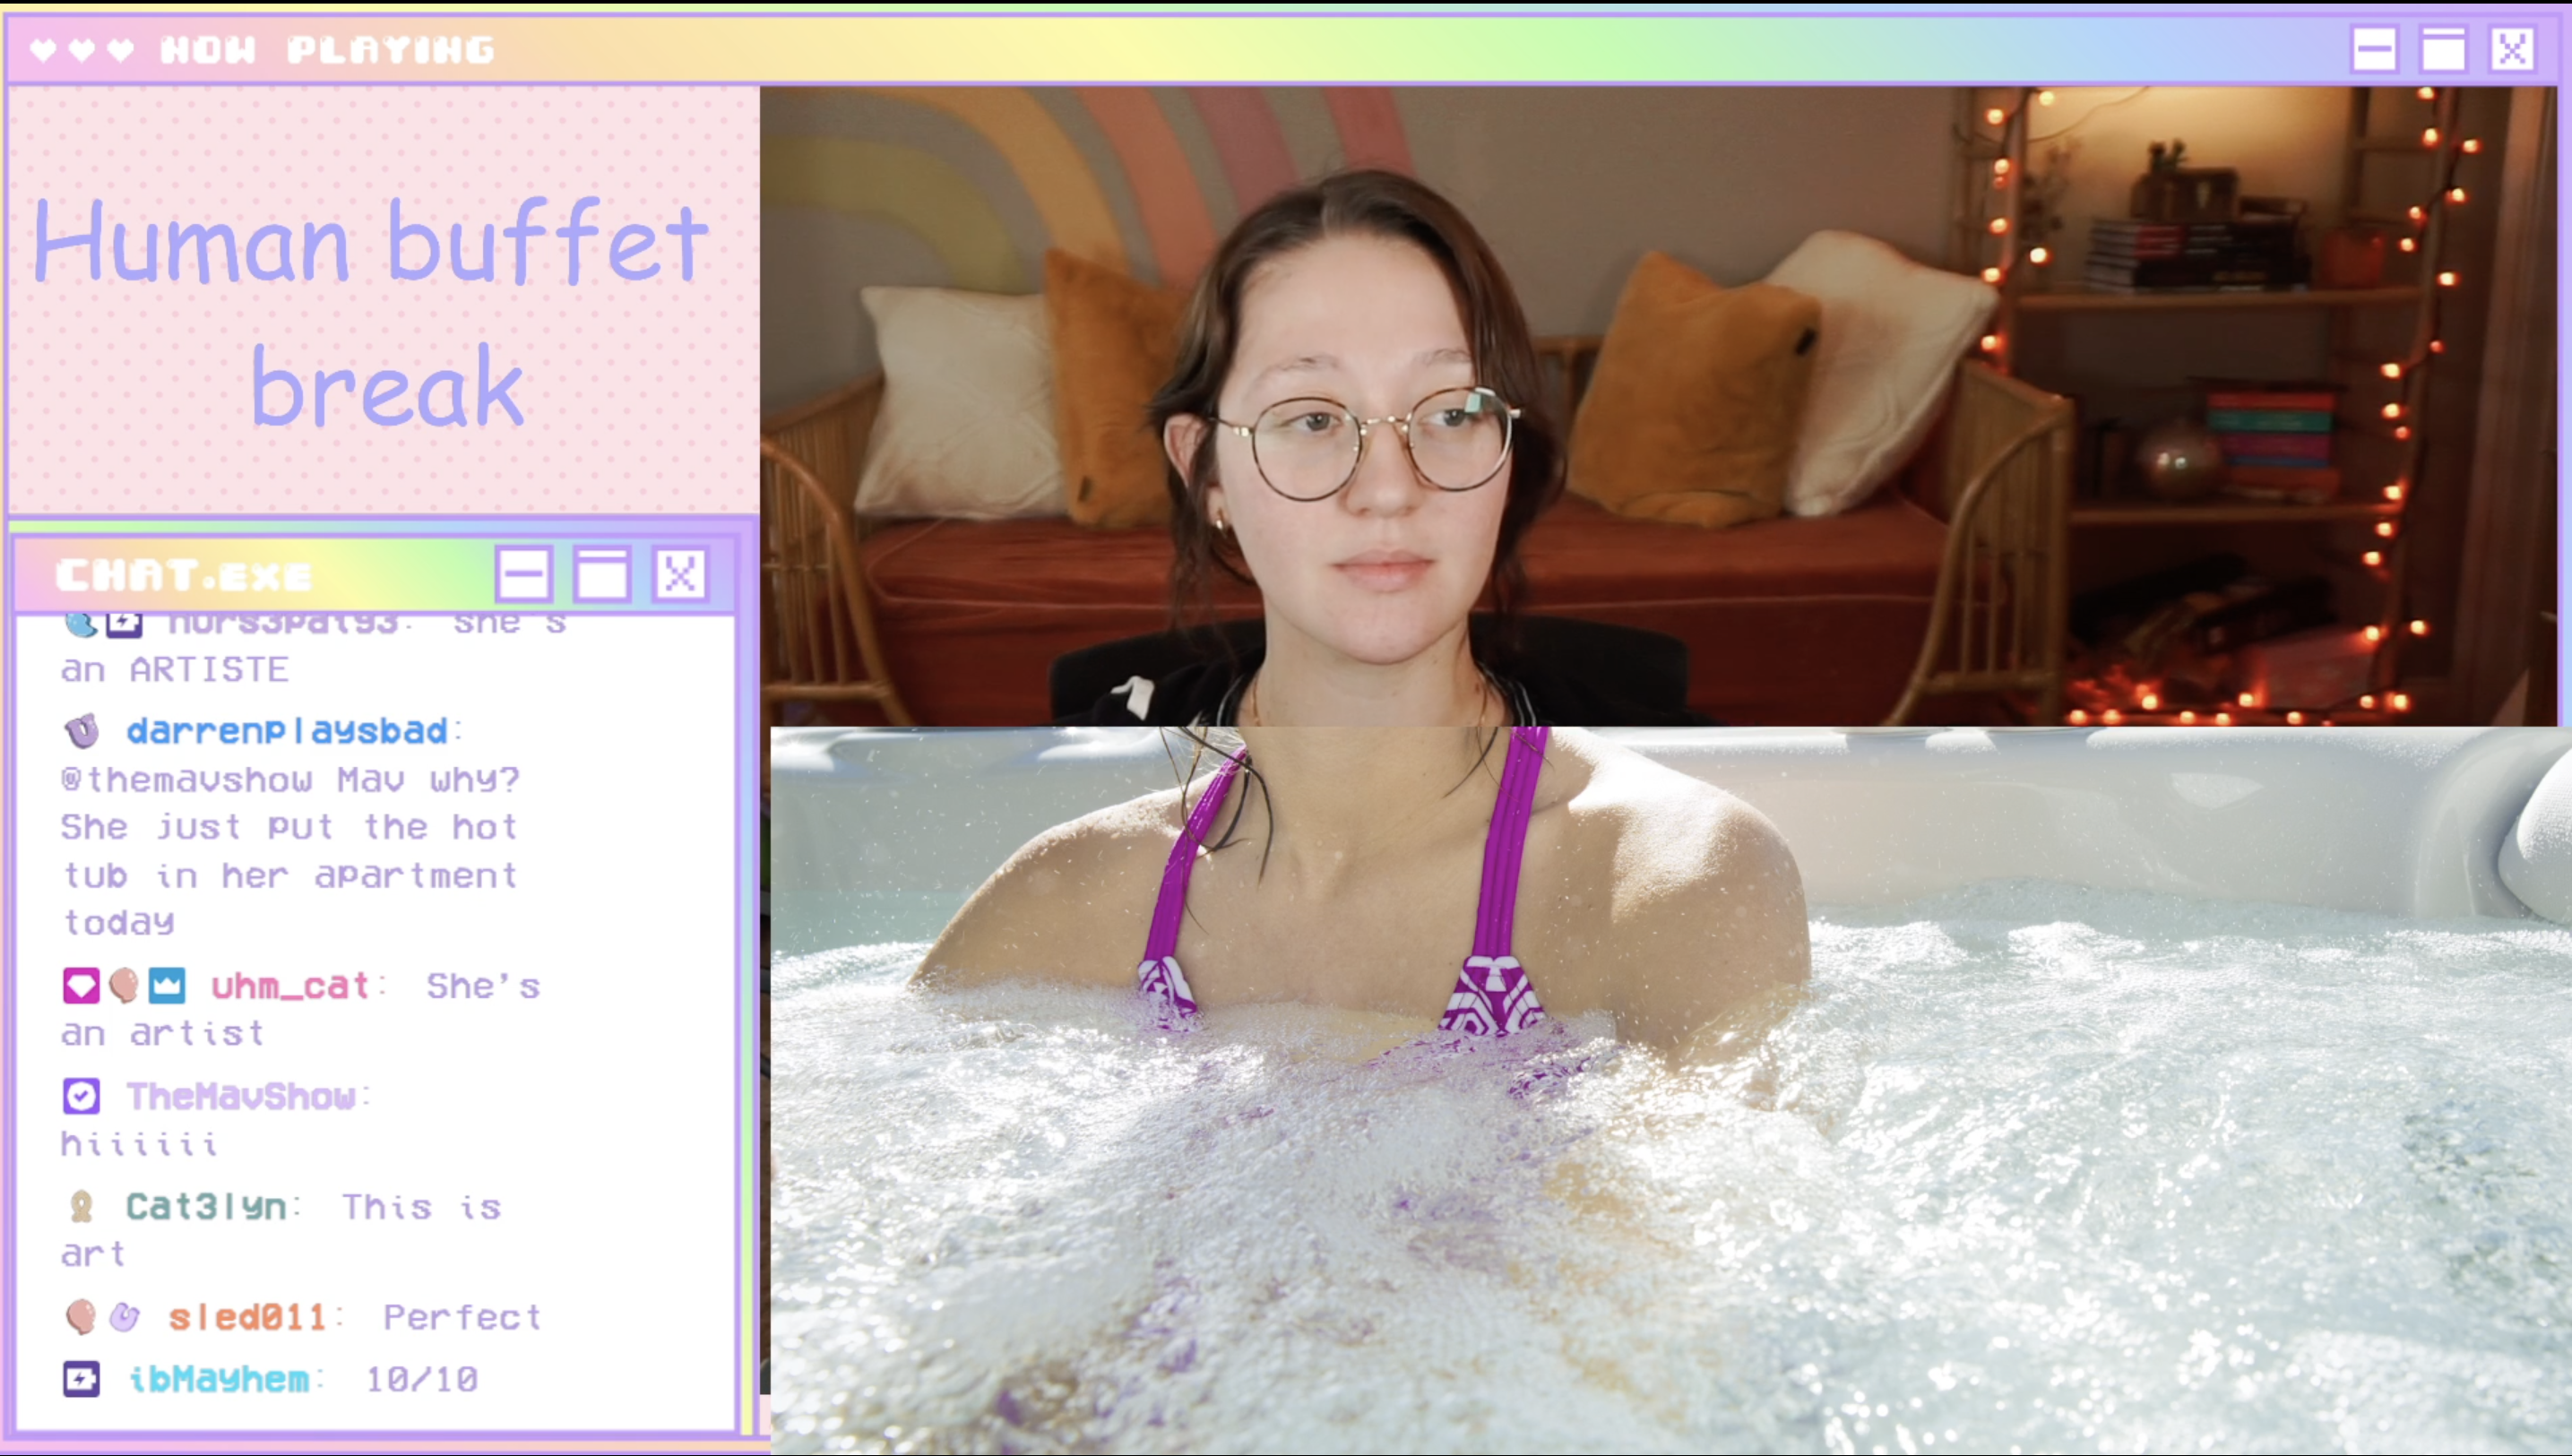 An image of a Twitch streamer LuxieGames streaming live. She has an overlay of a hot tub covering her from the neck down as she breastfeeds her child. She’s smiling and it actually looks like she’s in a hot tub because the overlay lines up so well. On the left, the text reads: “Human buffet break” in reference to her infant feeding.